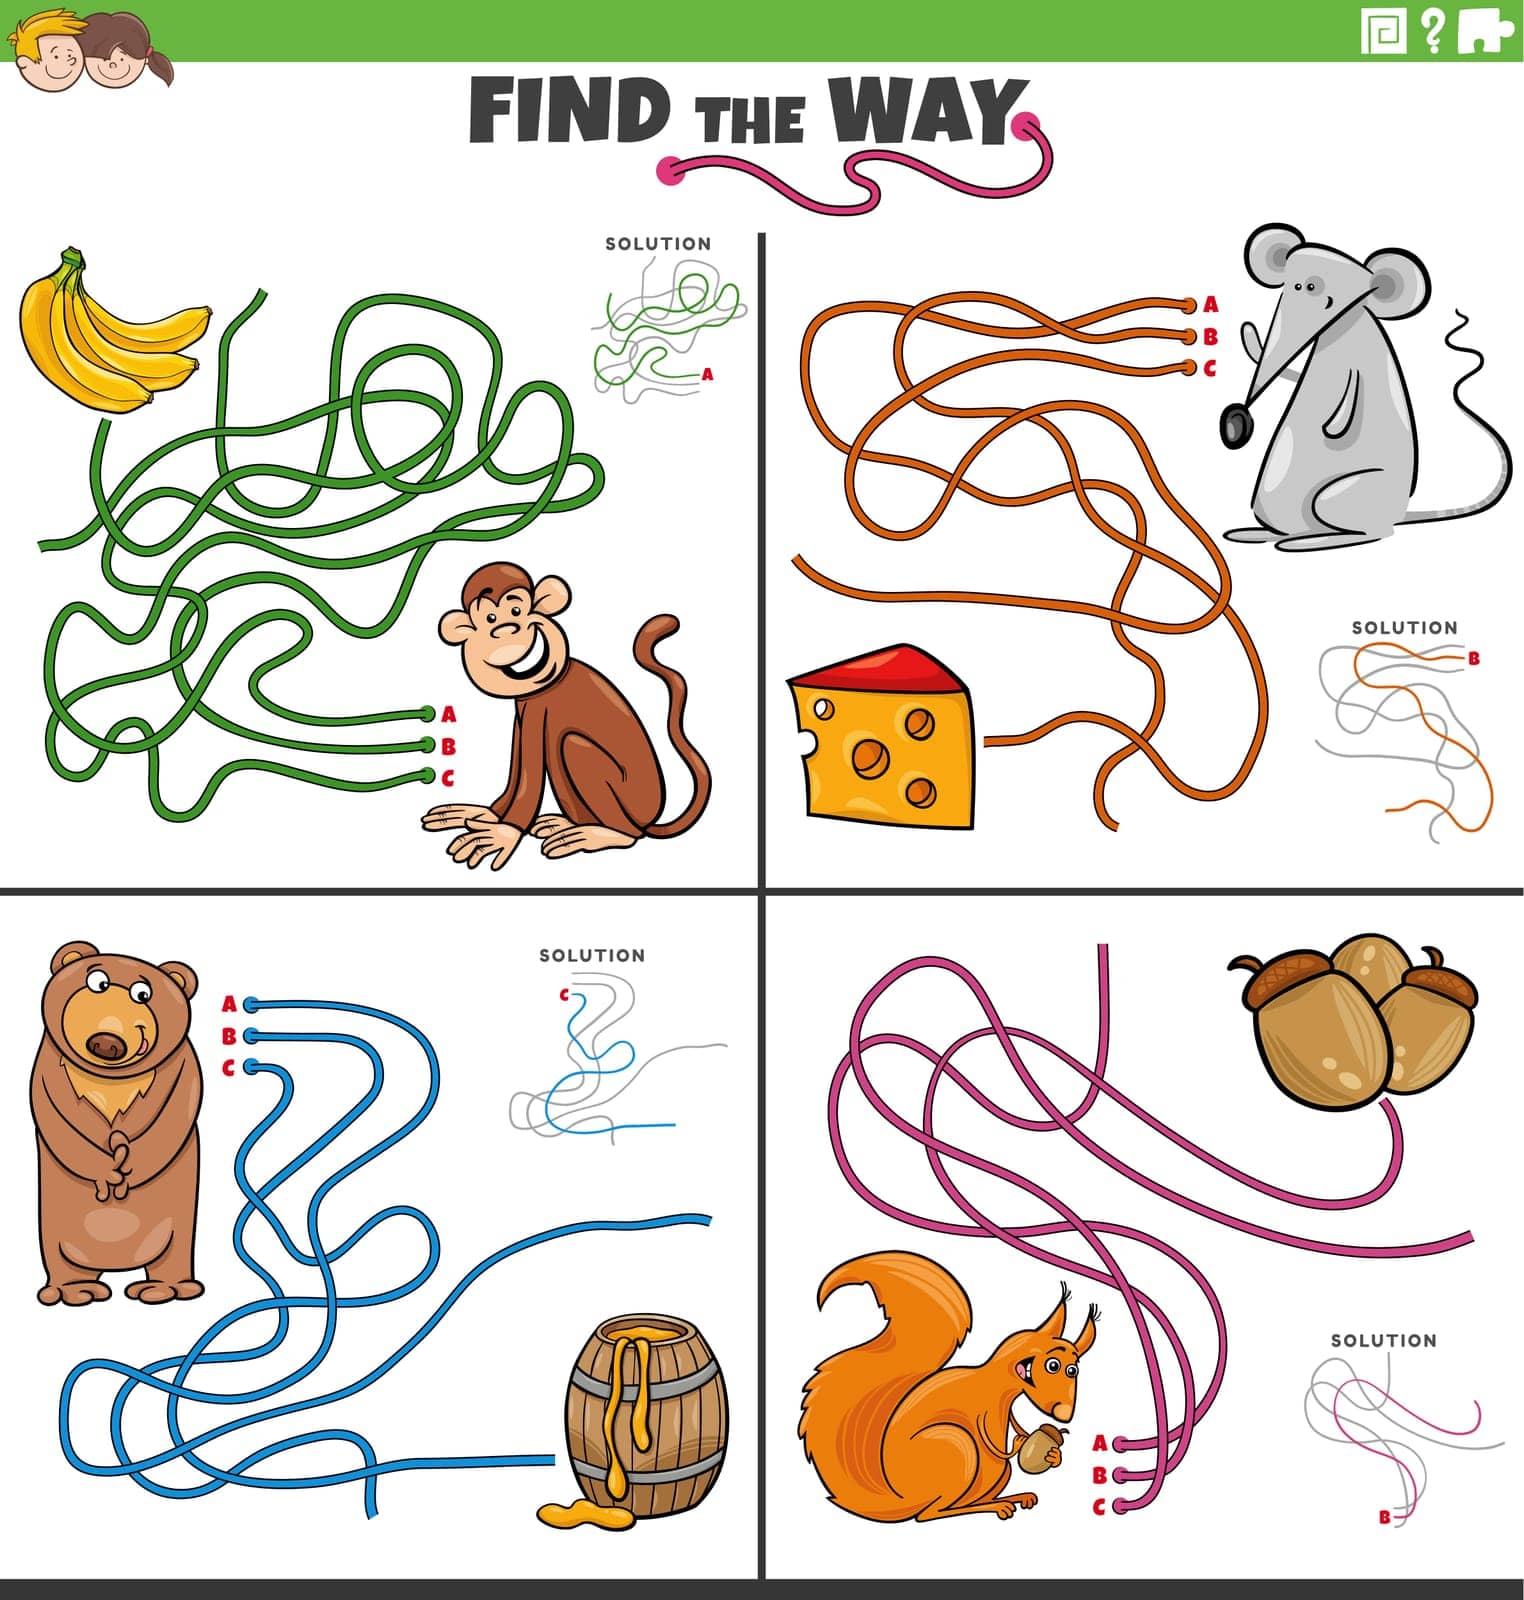 Cartoon illustration of find the way maze puzzle game with funny animal characters